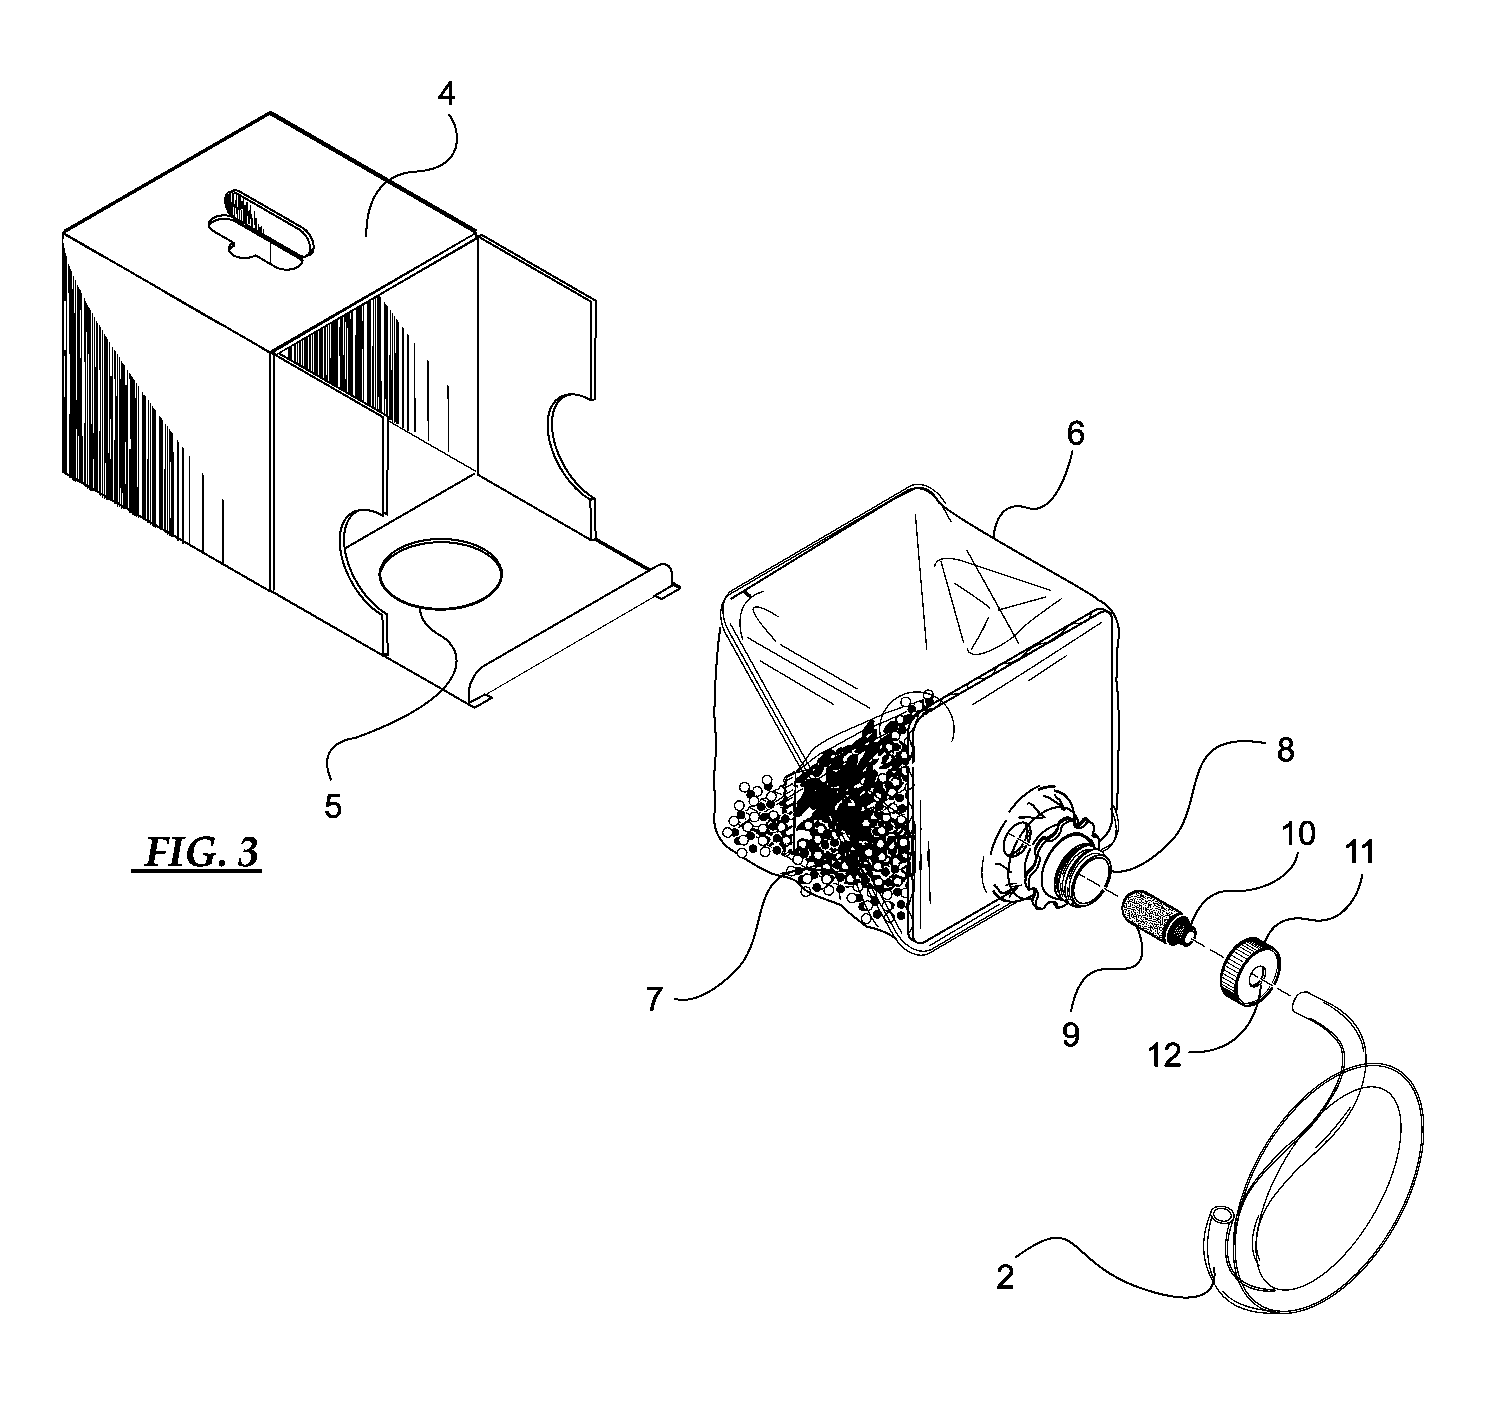 Apparatus and method for remediation of a drain system